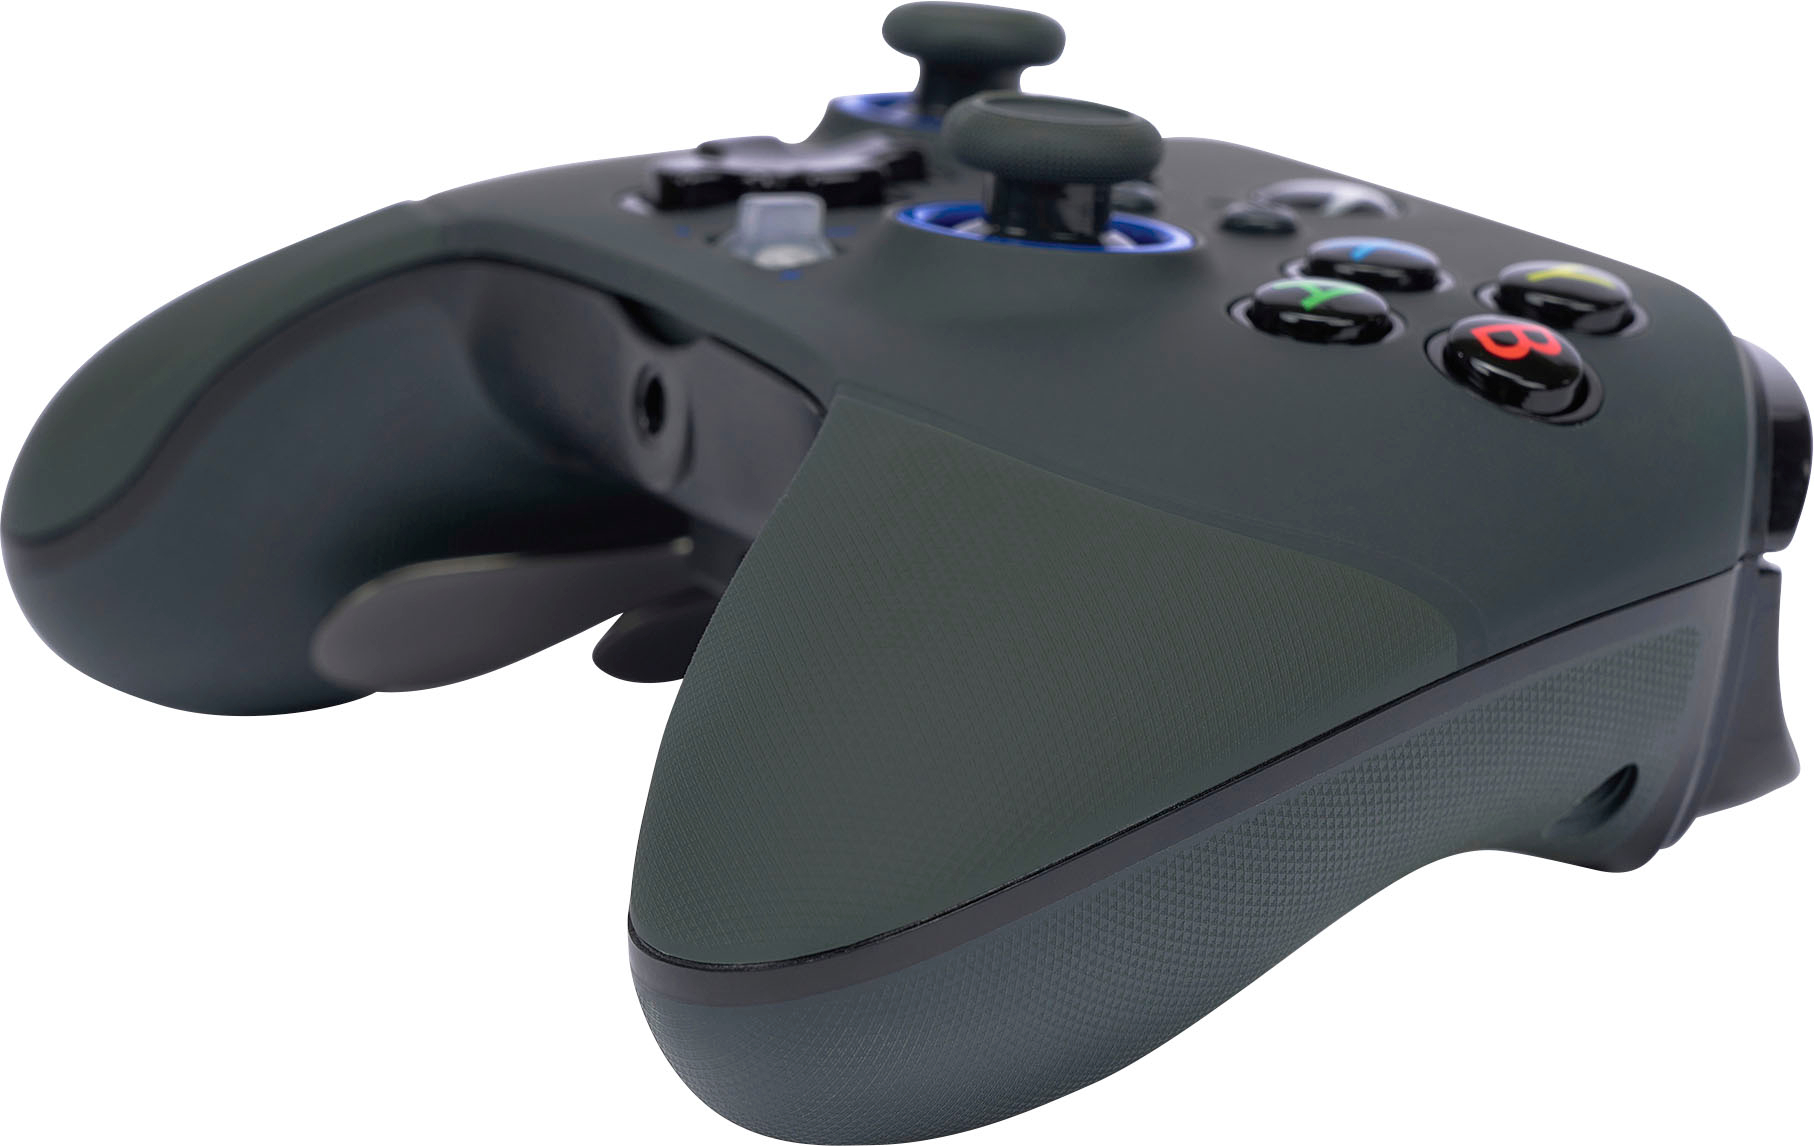 Xbox Made a Fancy Controller Out of Actual Jade - IGN